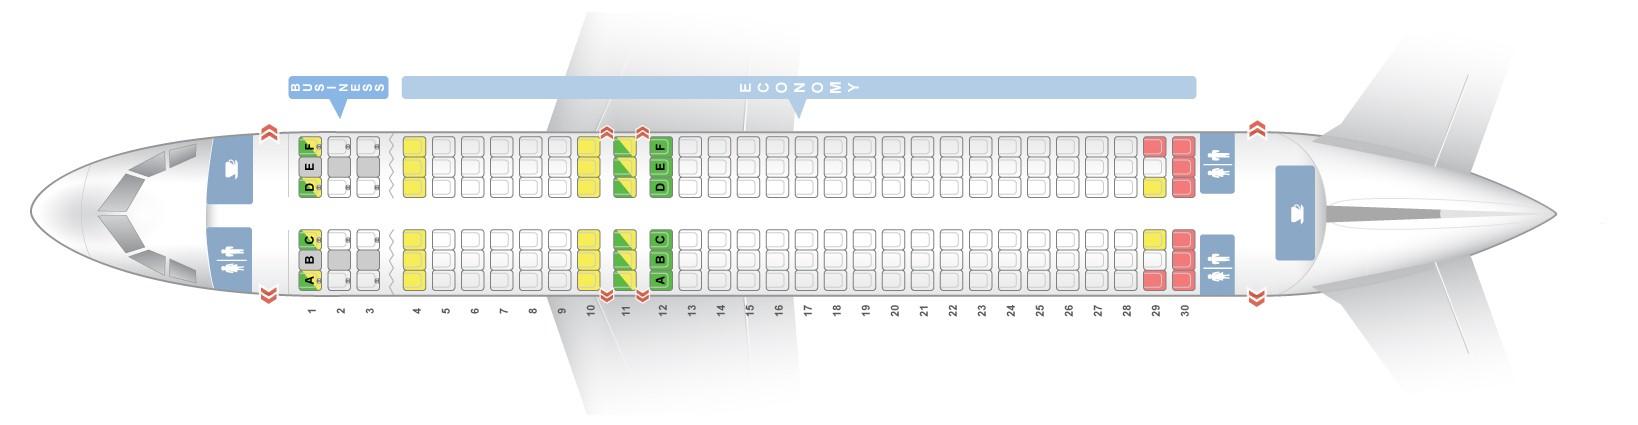 Seat Map Airbus A320 200 Brussels Airlines Best Seats In The Plane